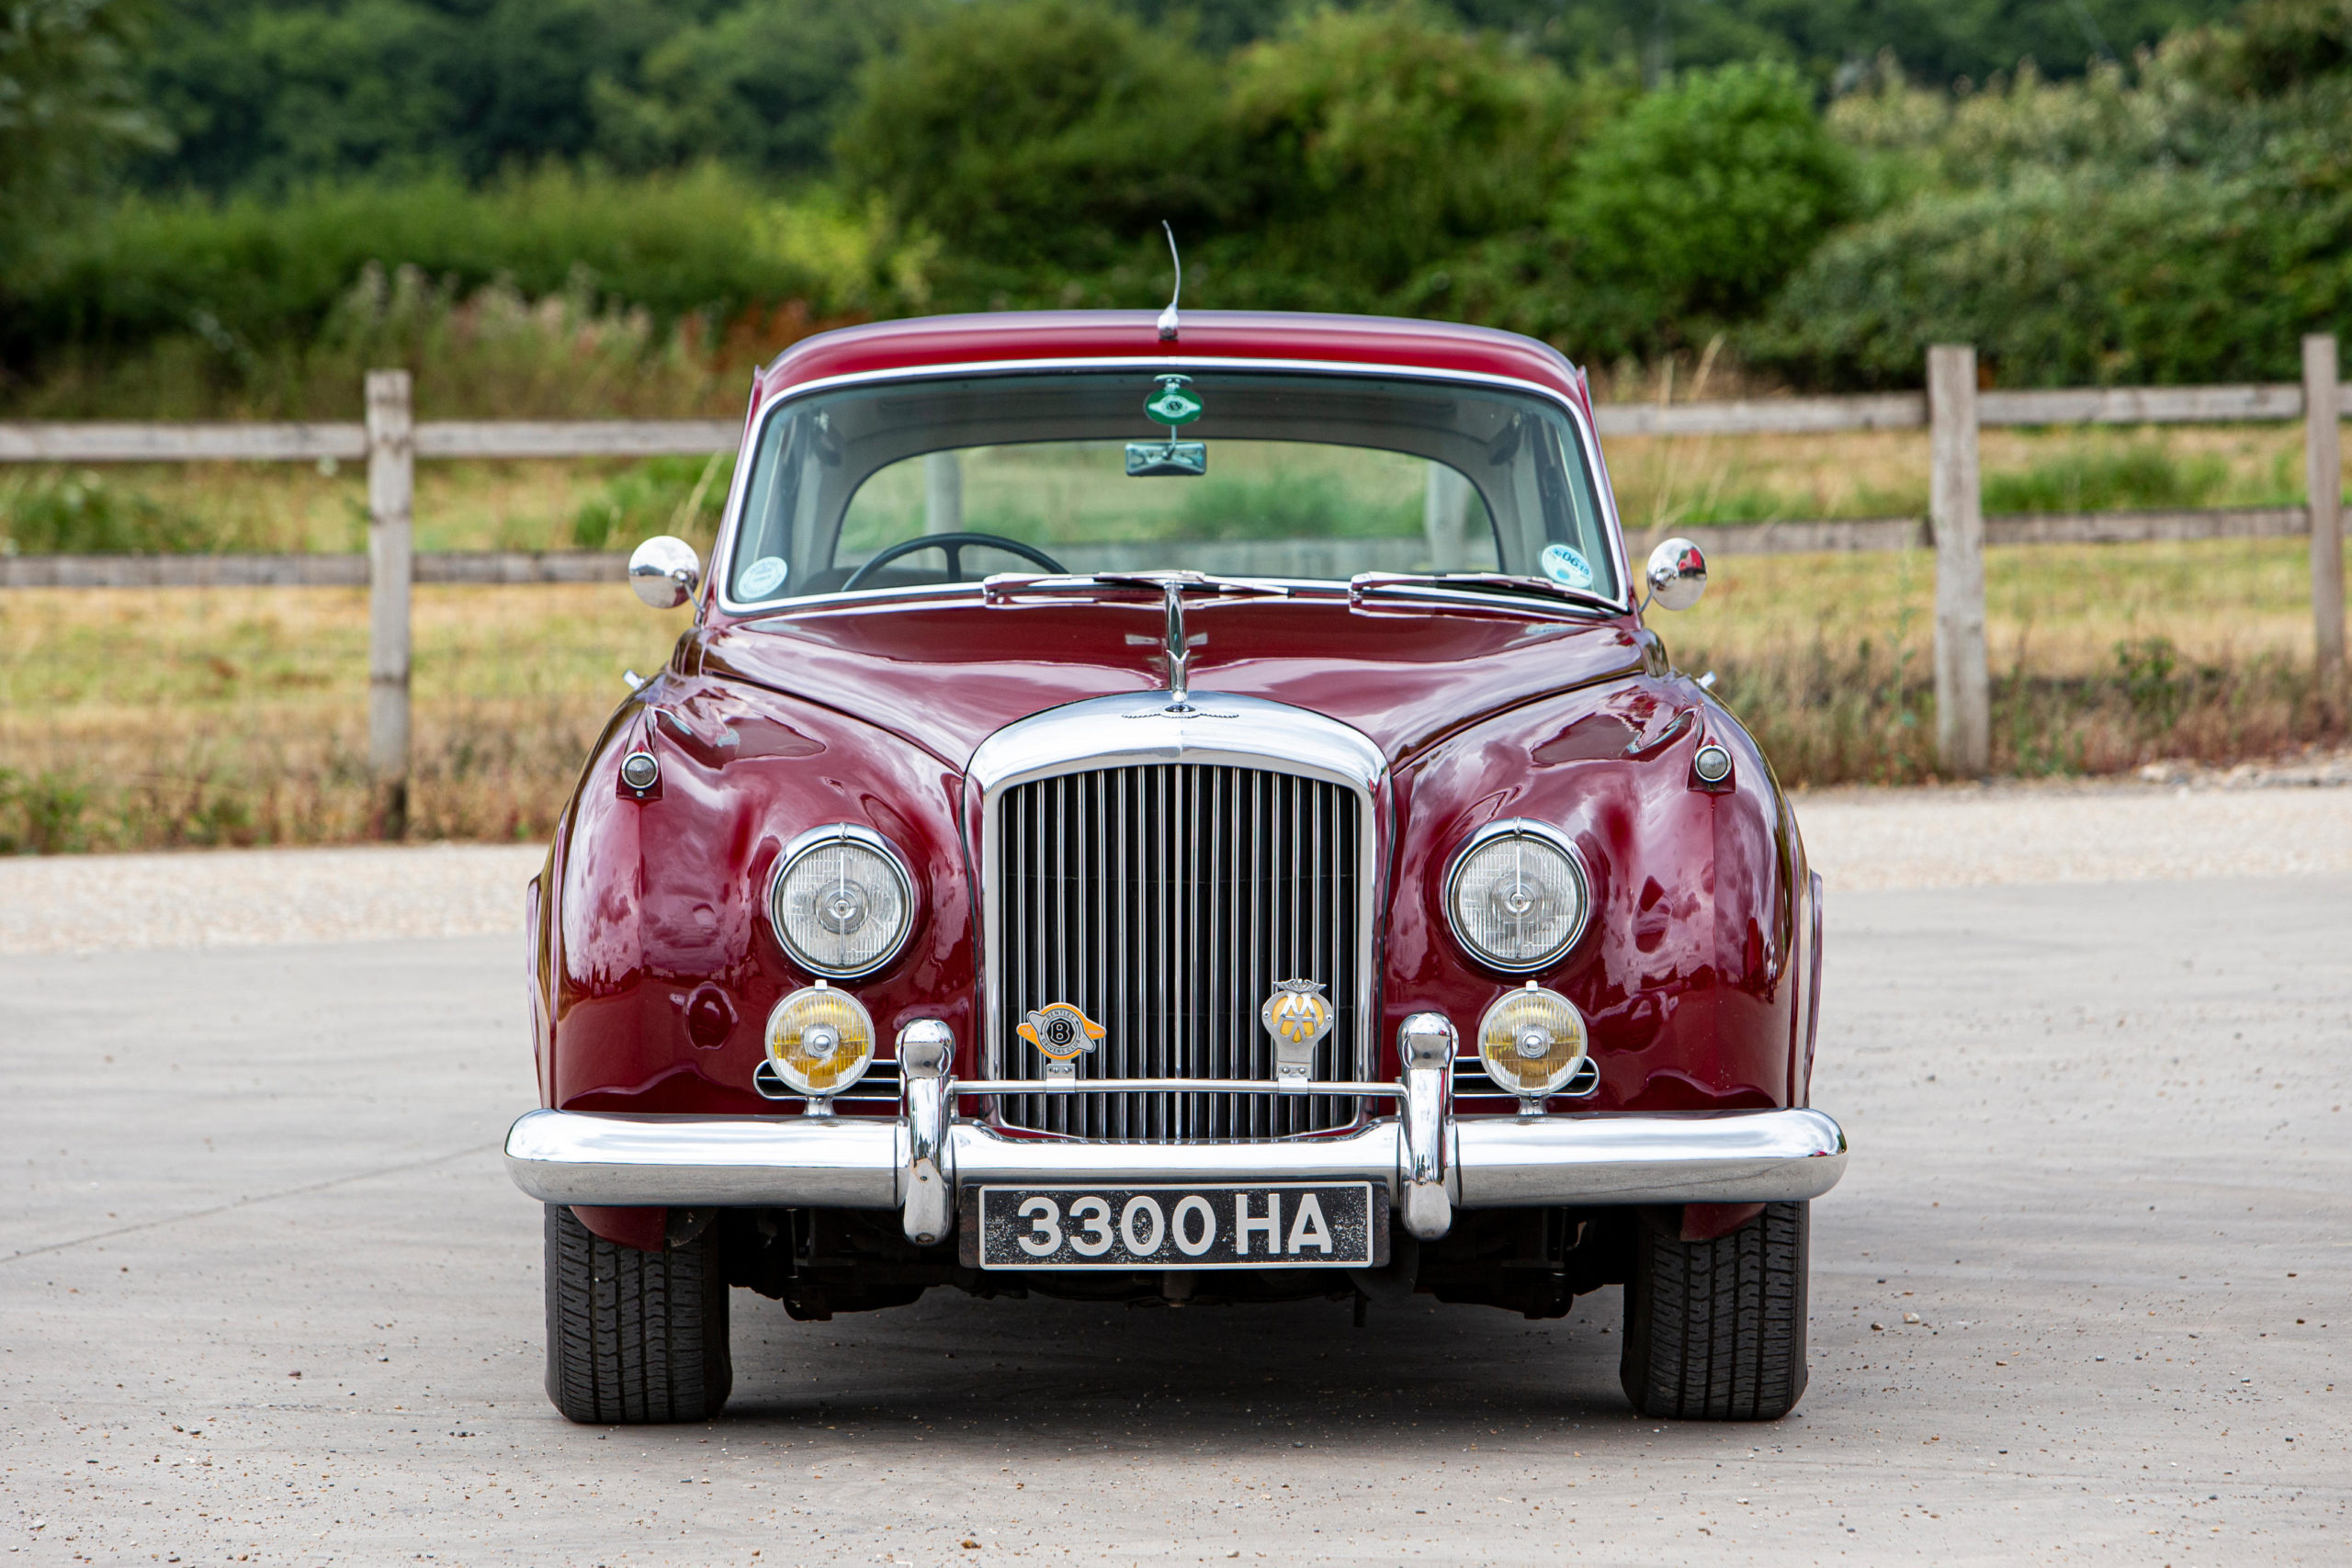 1961 Bentley S2 Continental Flying Spur Sports Saloon, Bentley, Bentley Continental